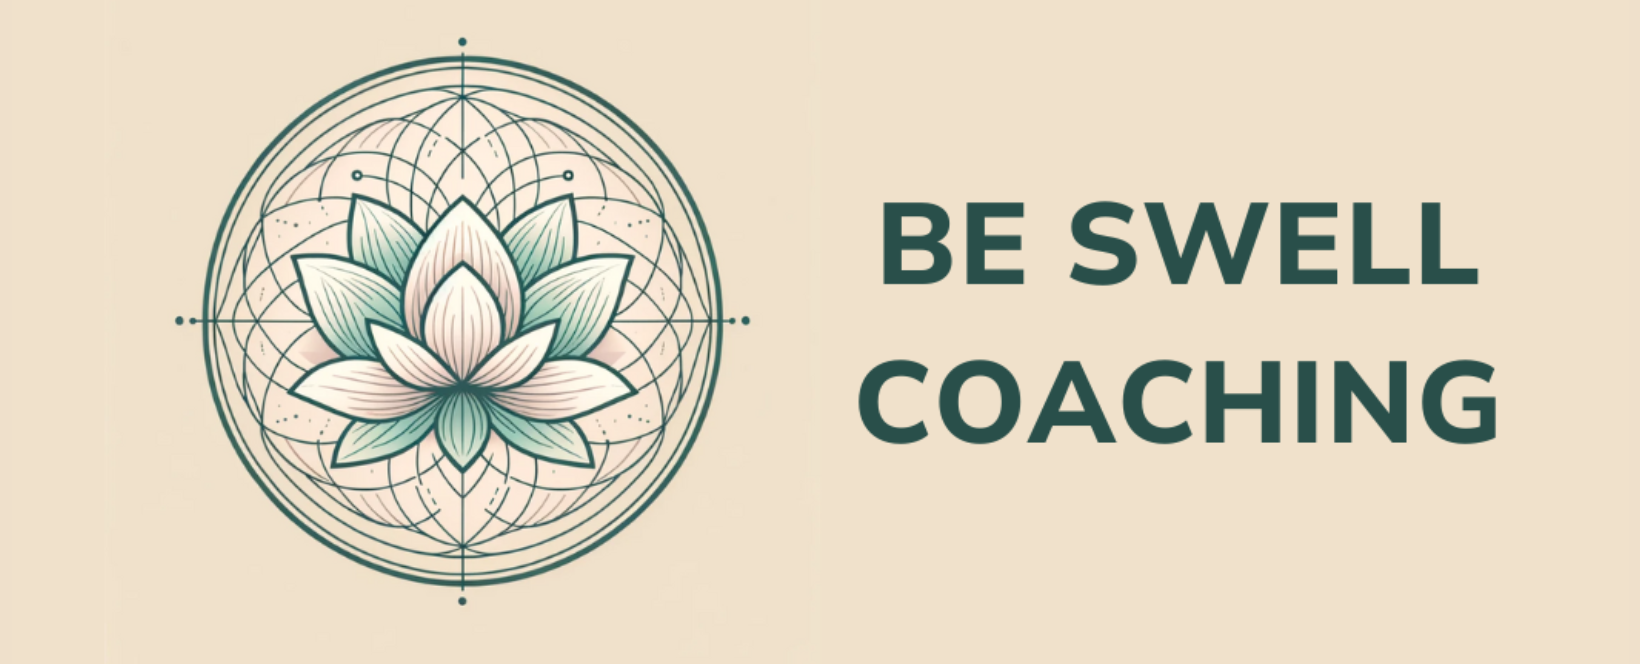 Be Swell Integration Coaching | Trauma informed coaching based on the 5 Elements in Chinese Medicine